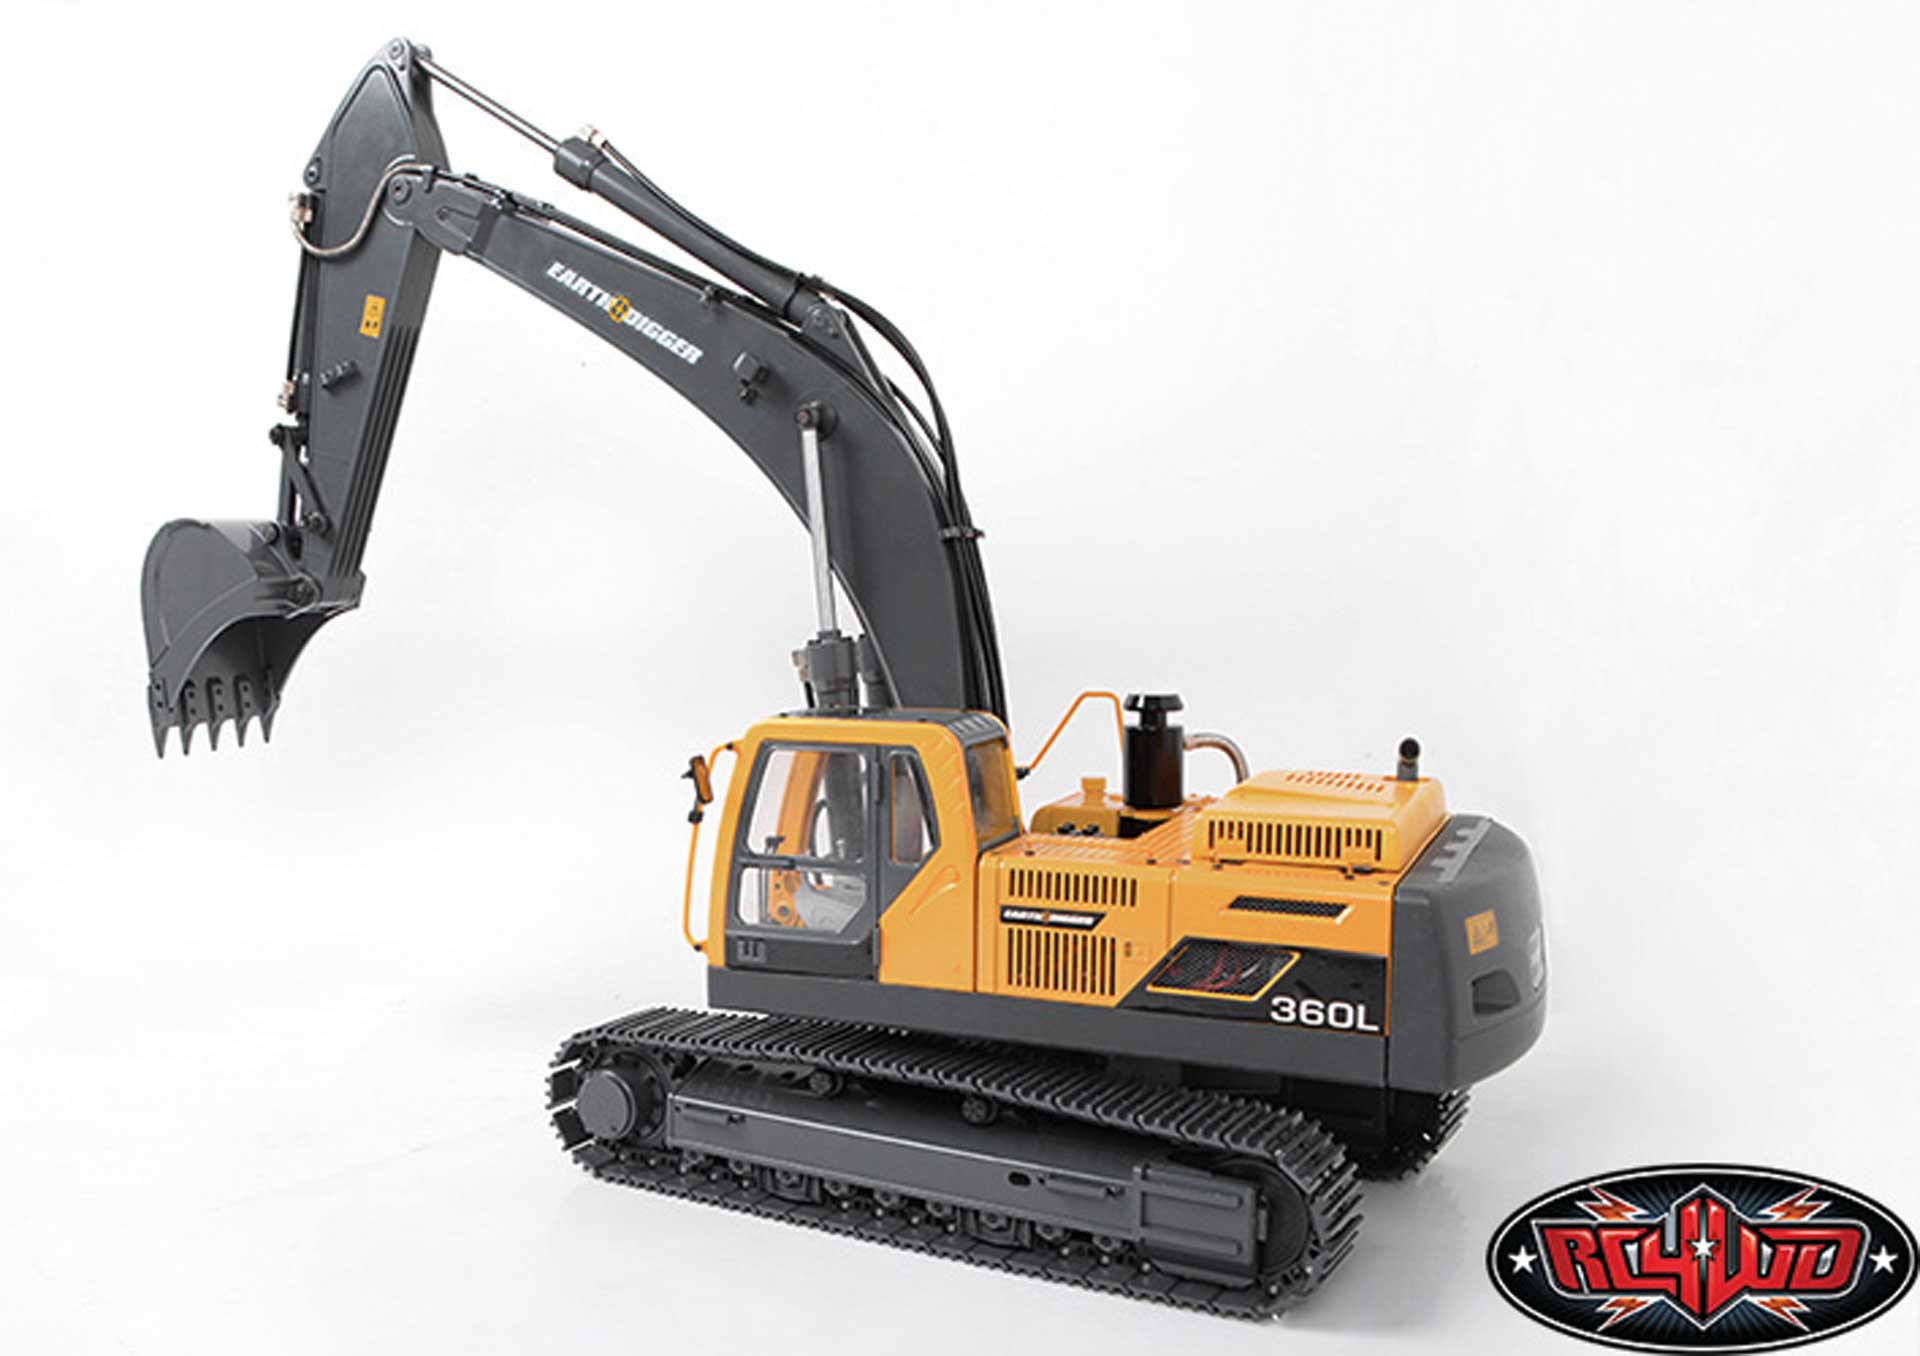 RC4WD EARTH DIGGER 360L HYDRAULIC EXCAVATOR 1/ SCALE RTR 26KG VEHICLE